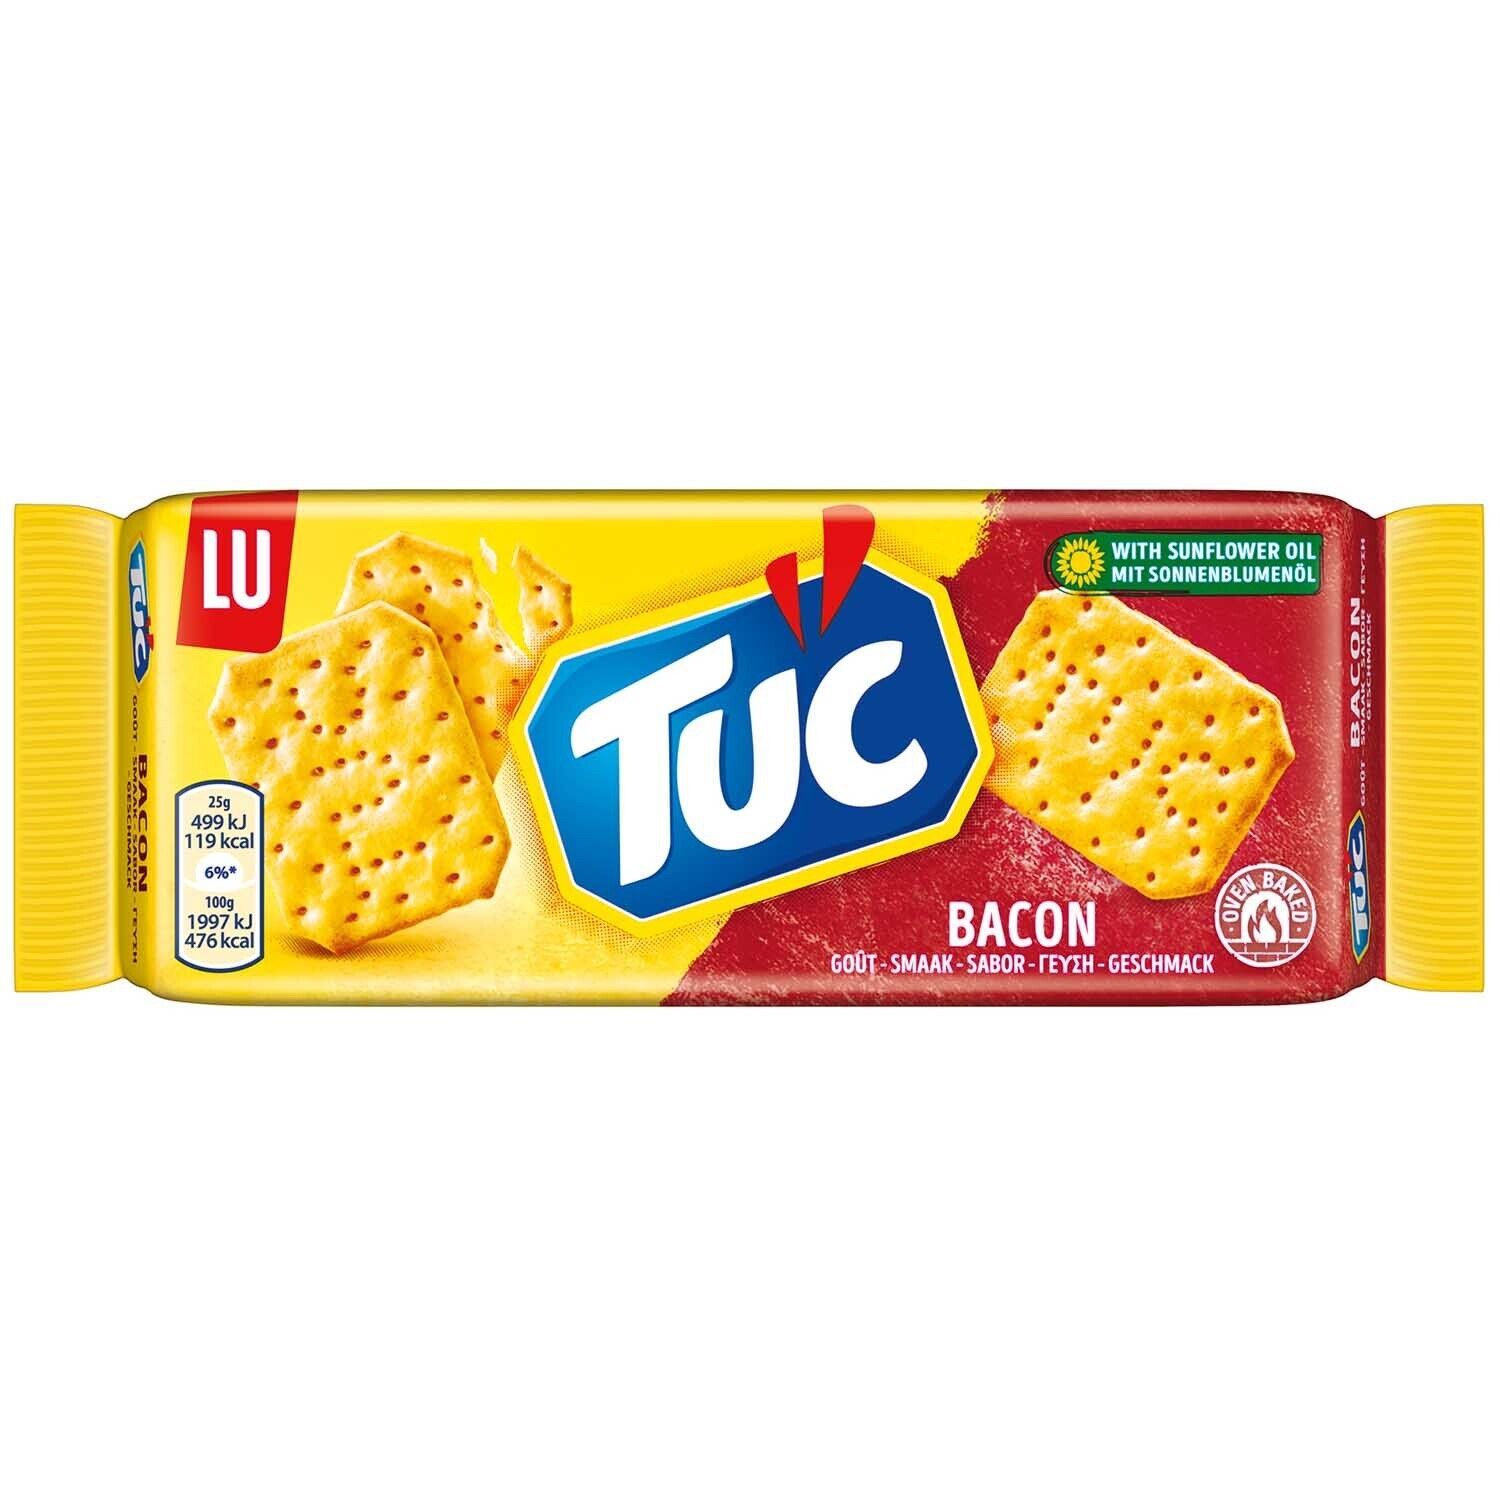 LU Tuc ORIGINAL BACON crackers -75g -Made in Germany FREE SHIPPING - $7.91